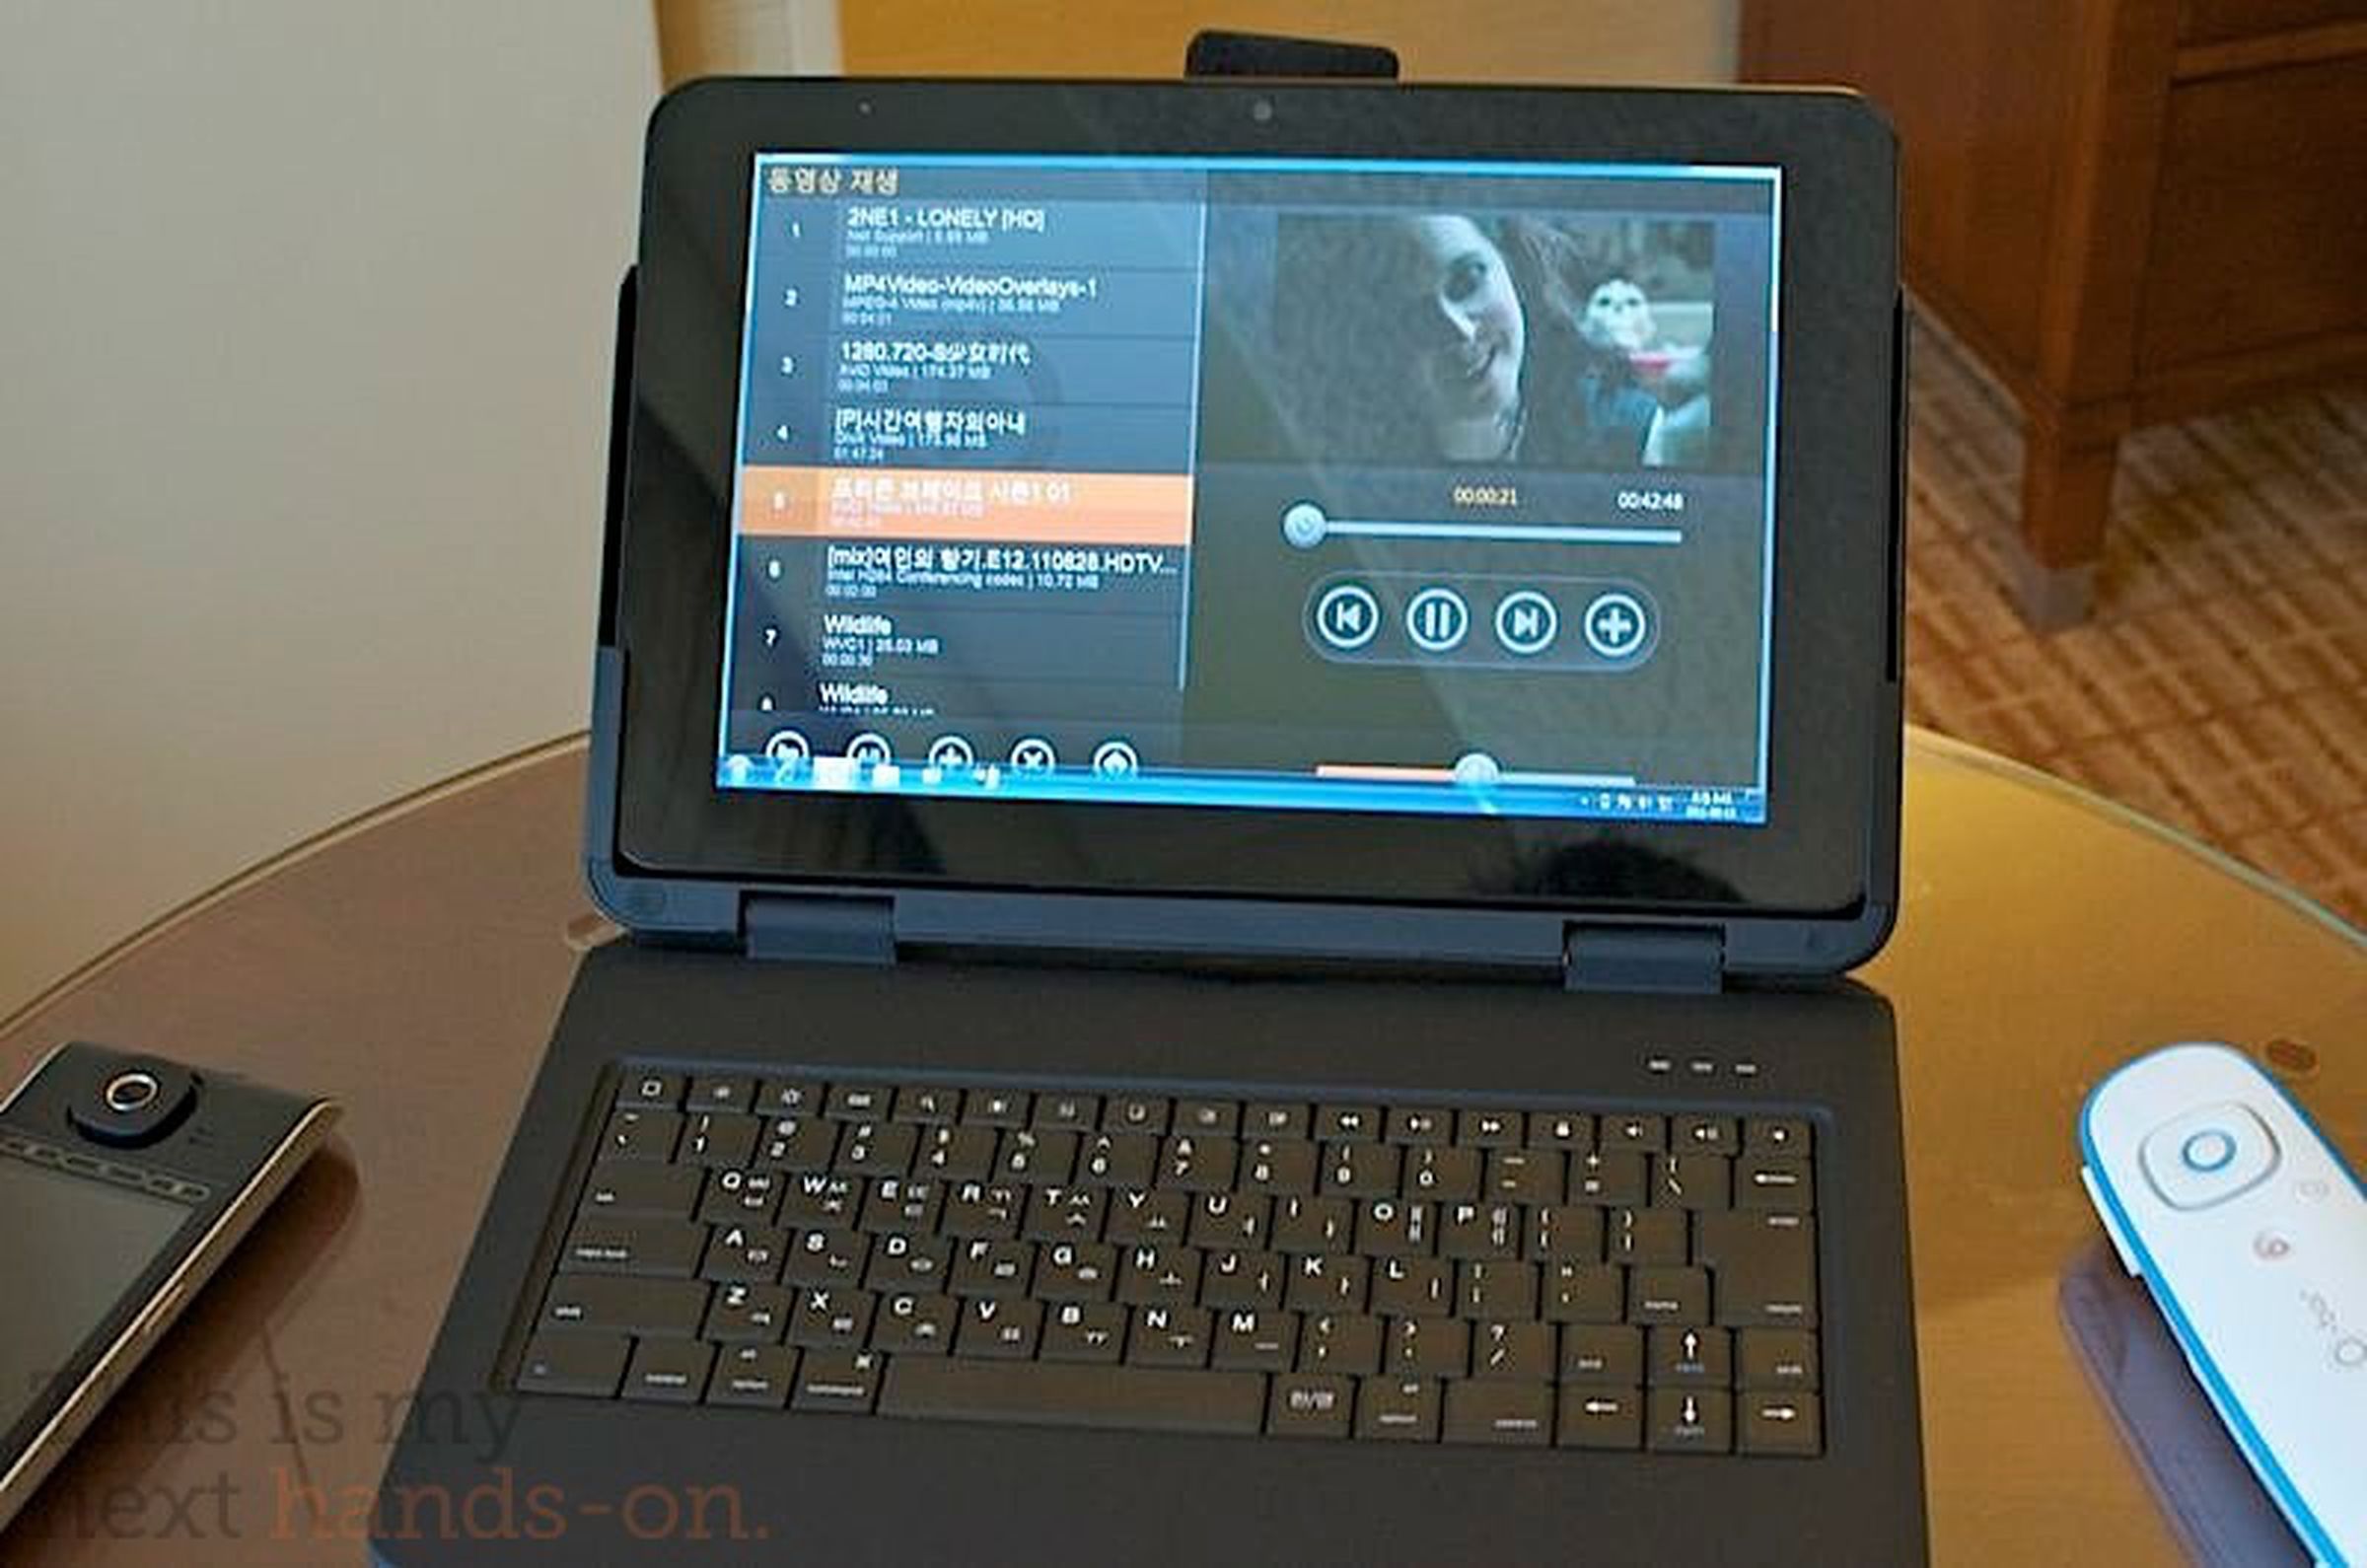 OCS9 Windows 7 Tablet and O-Bar remotes from OCOSMOS: hands-on pictures